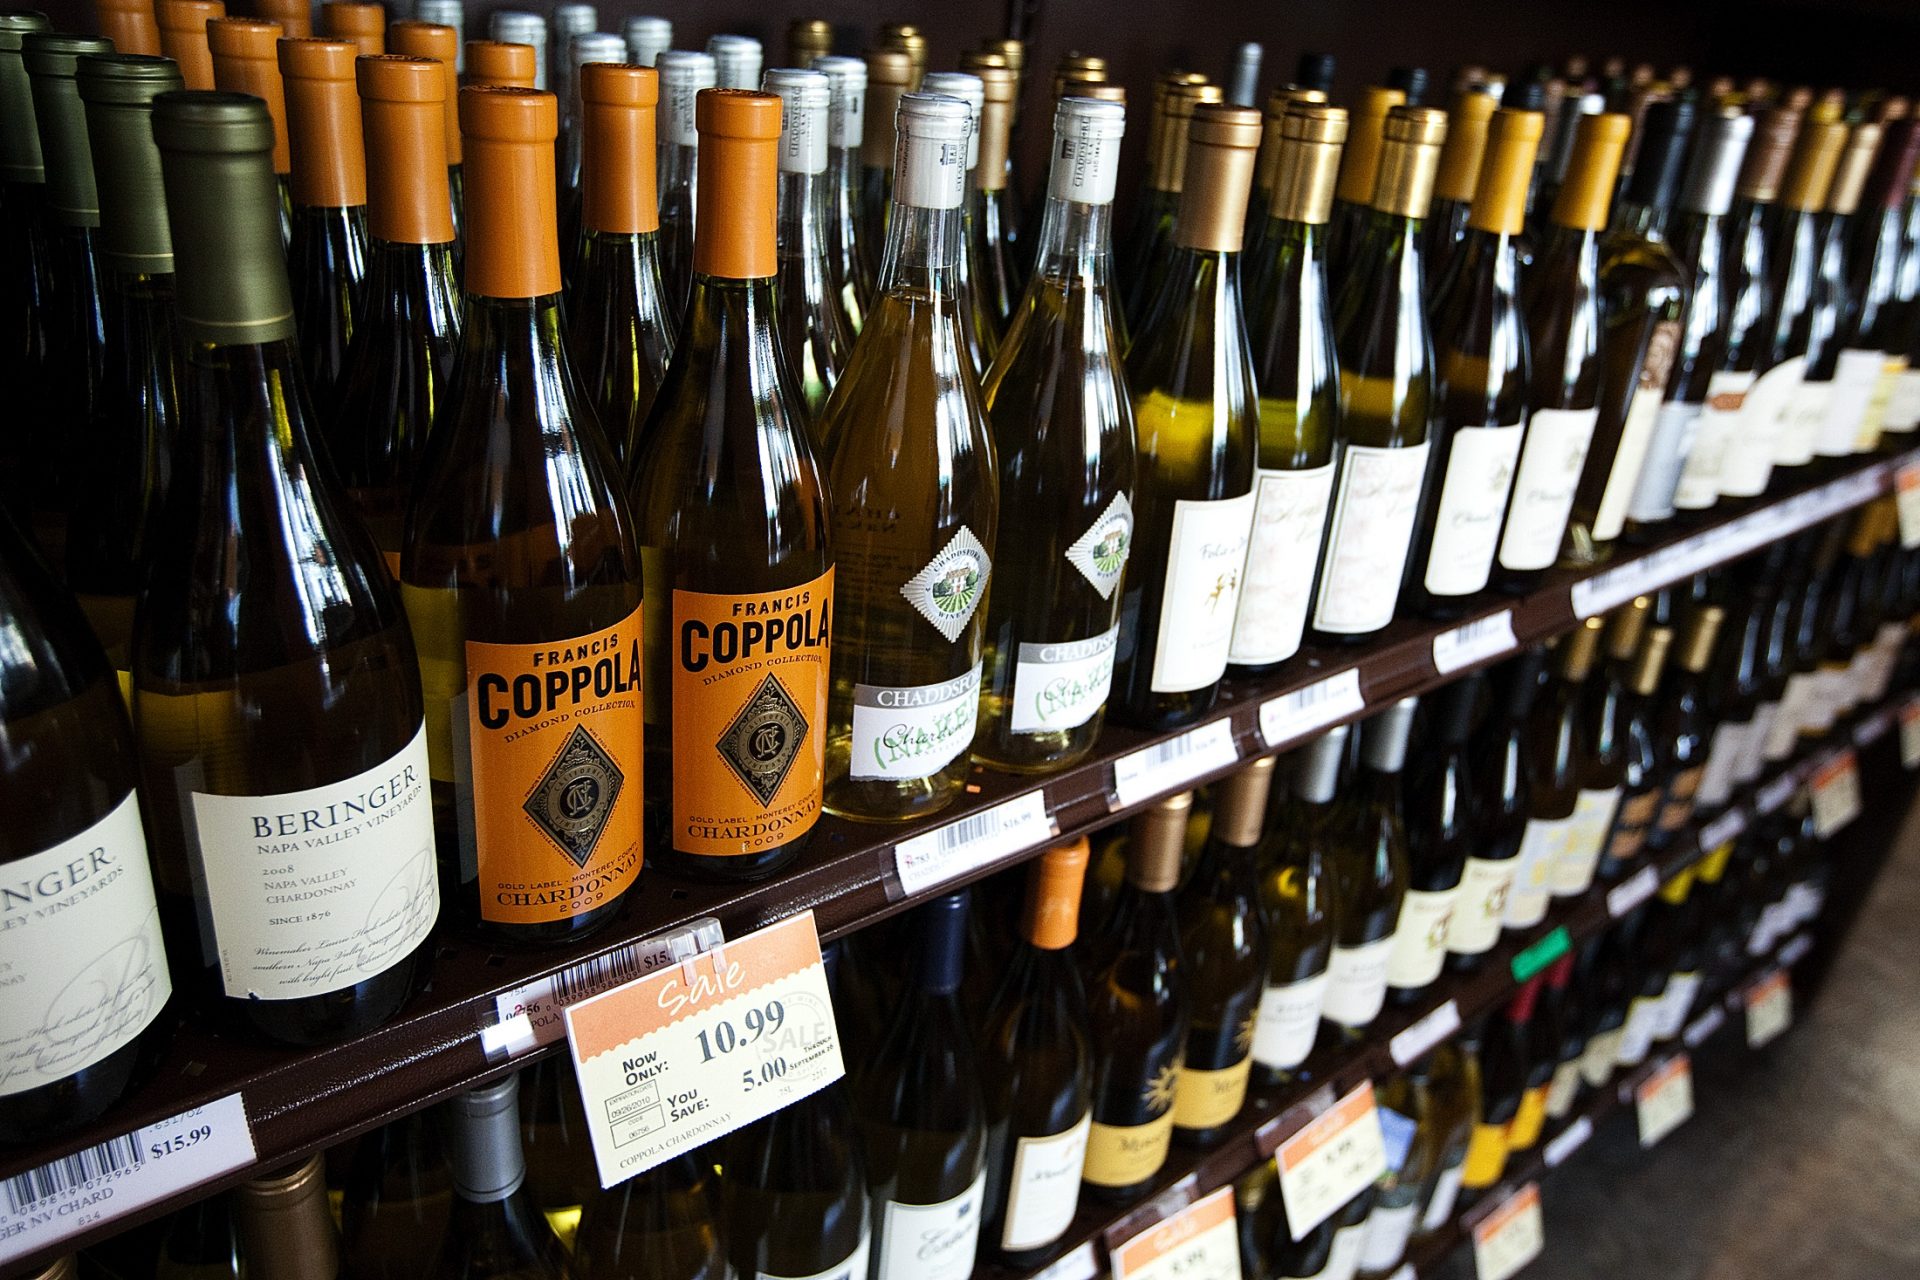 Bottles of wine are on display at the state-run wine and spirits store at 333 Market St. in Harrisburg.